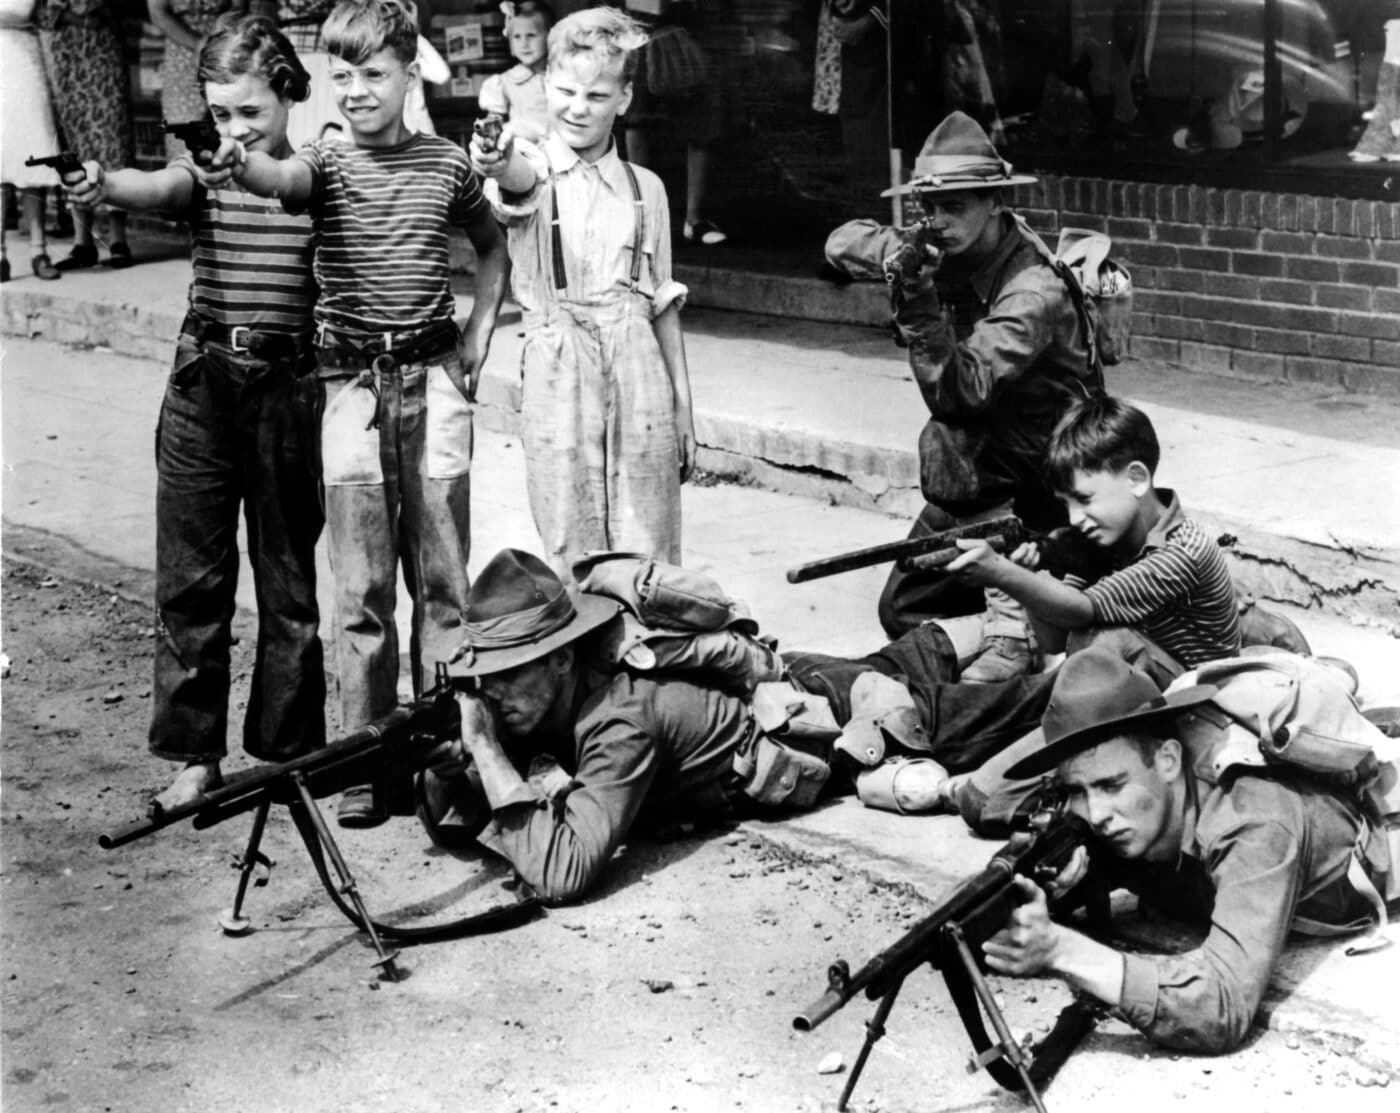 U.S. soldiers with M1918 BAR with children standing next to them with toy guns